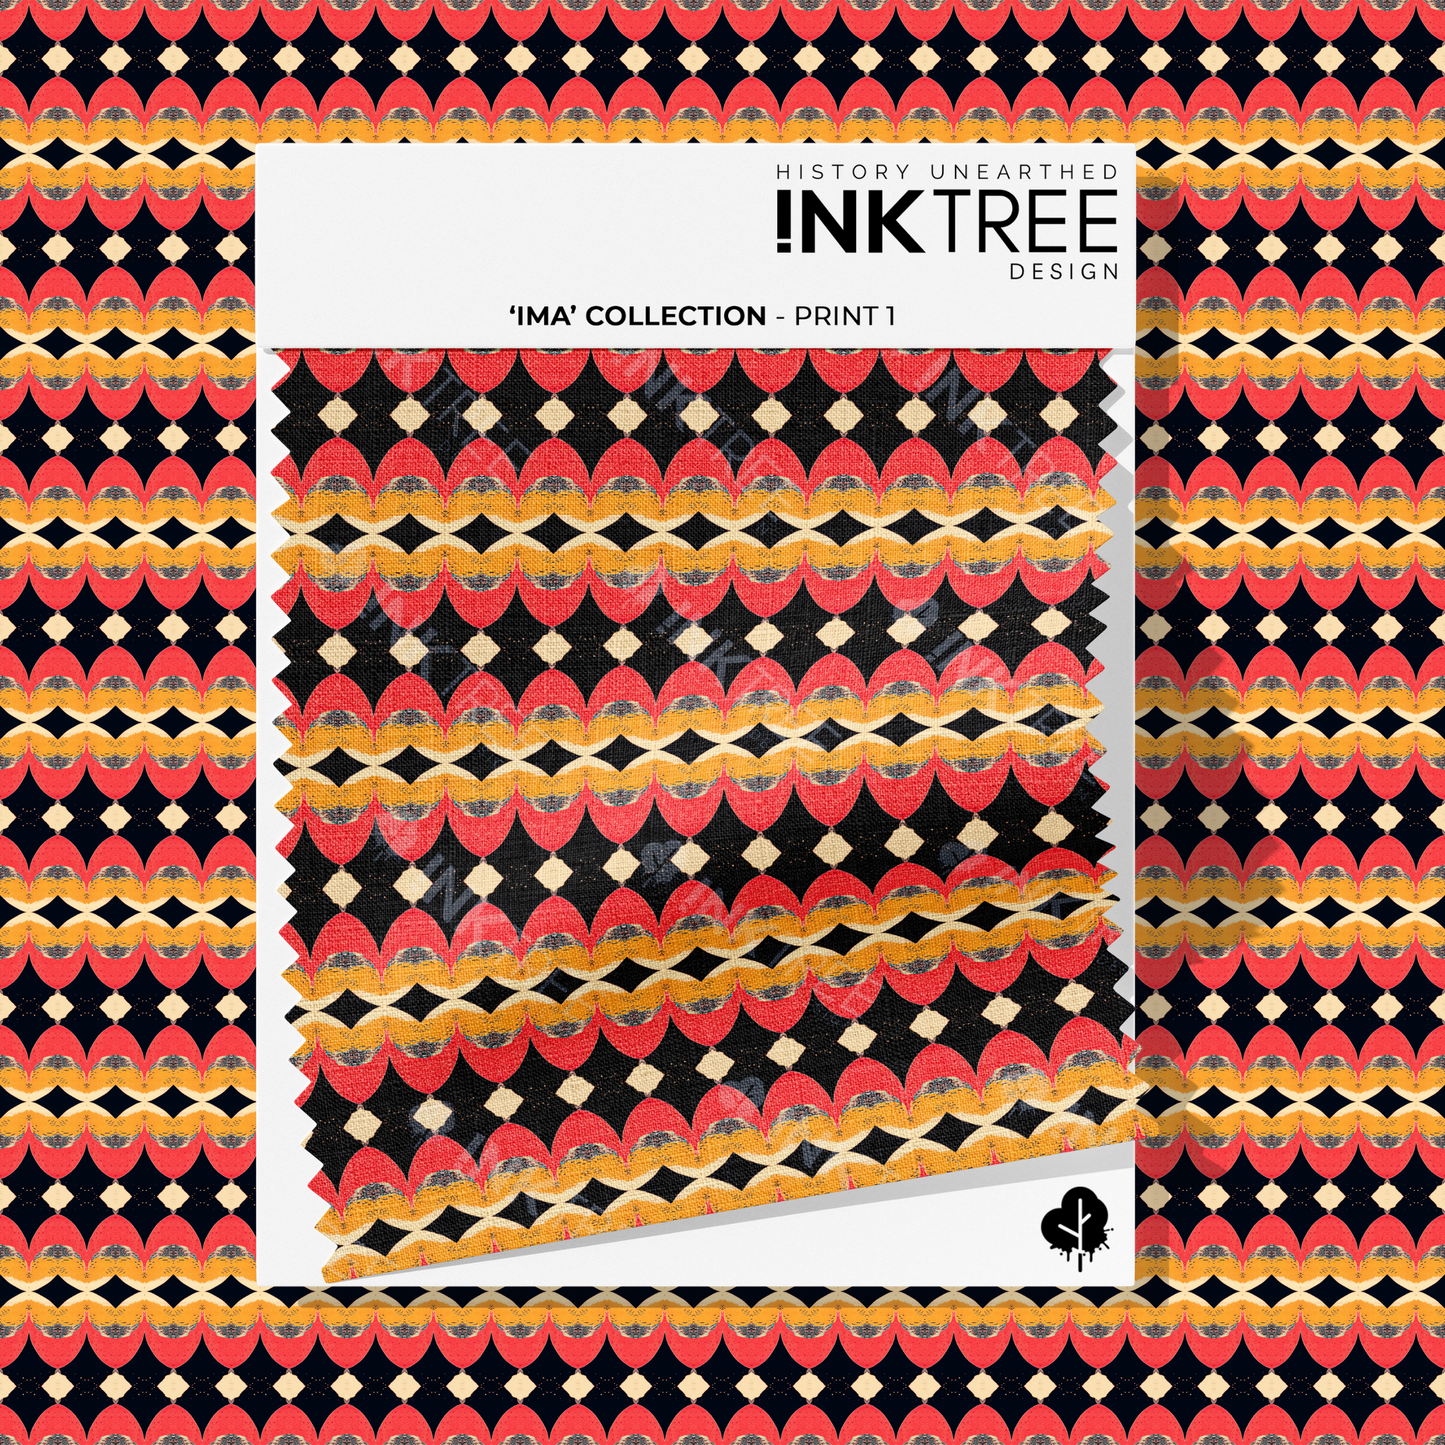 A white card fabric swatch with an orange, black and yellow straight print and ink tree design logo on it.  There is the same pattern on the background.